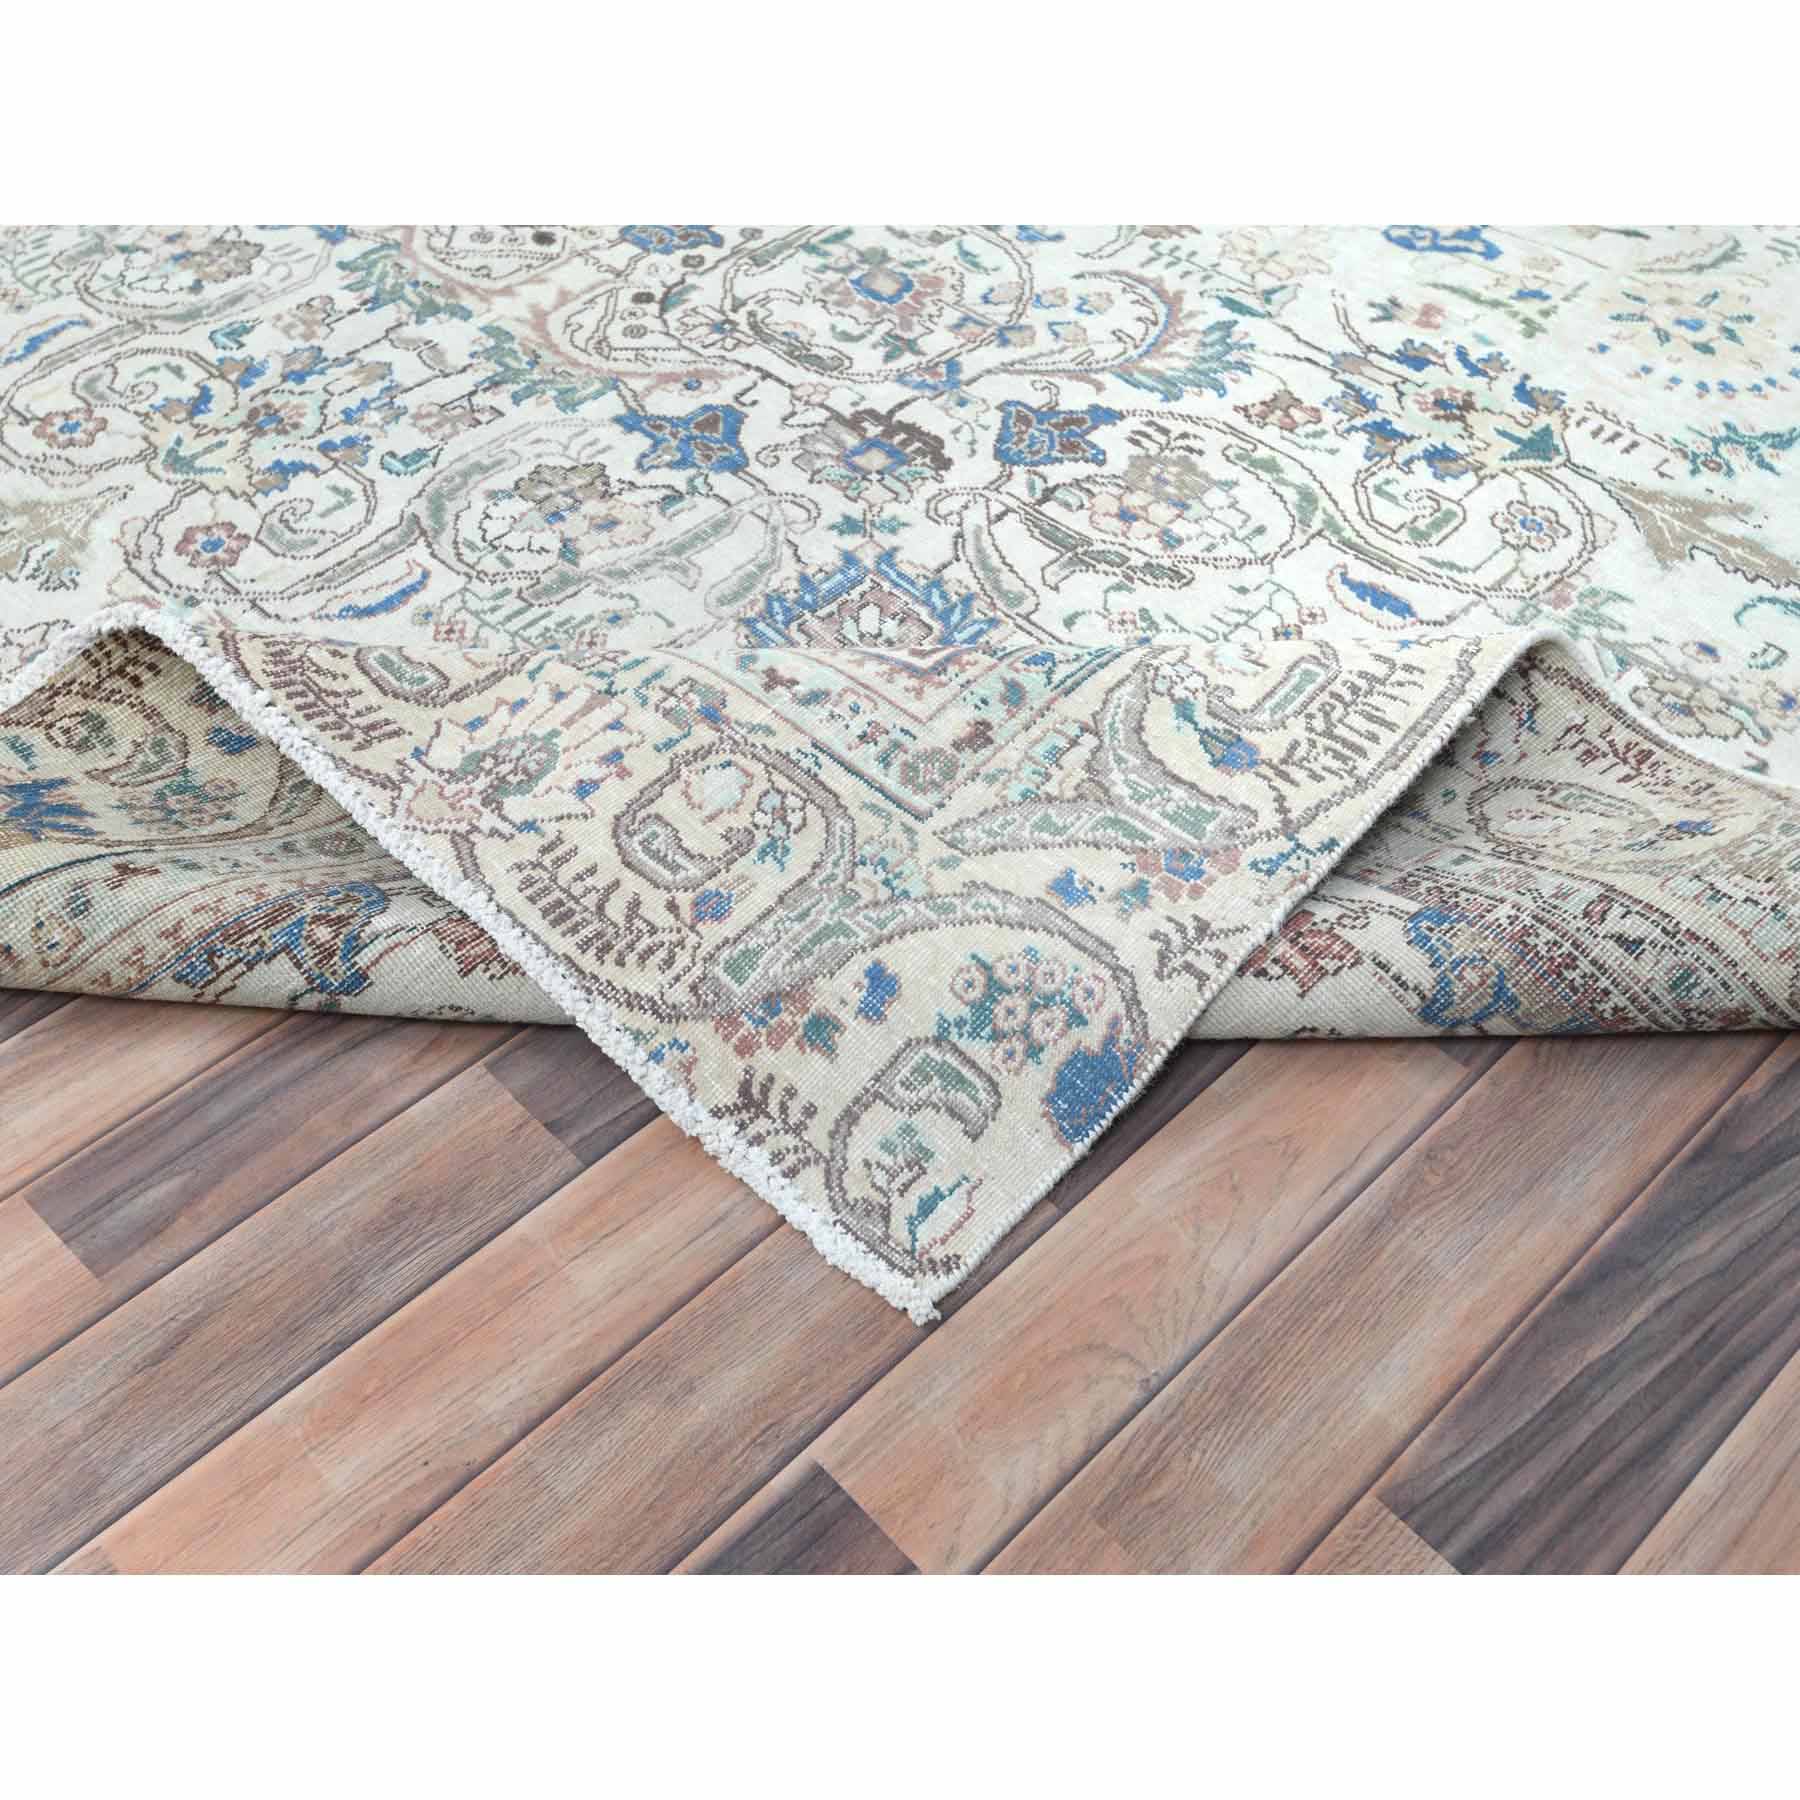 Overdyed-Vintage-Hand-Knotted-Rug-405580